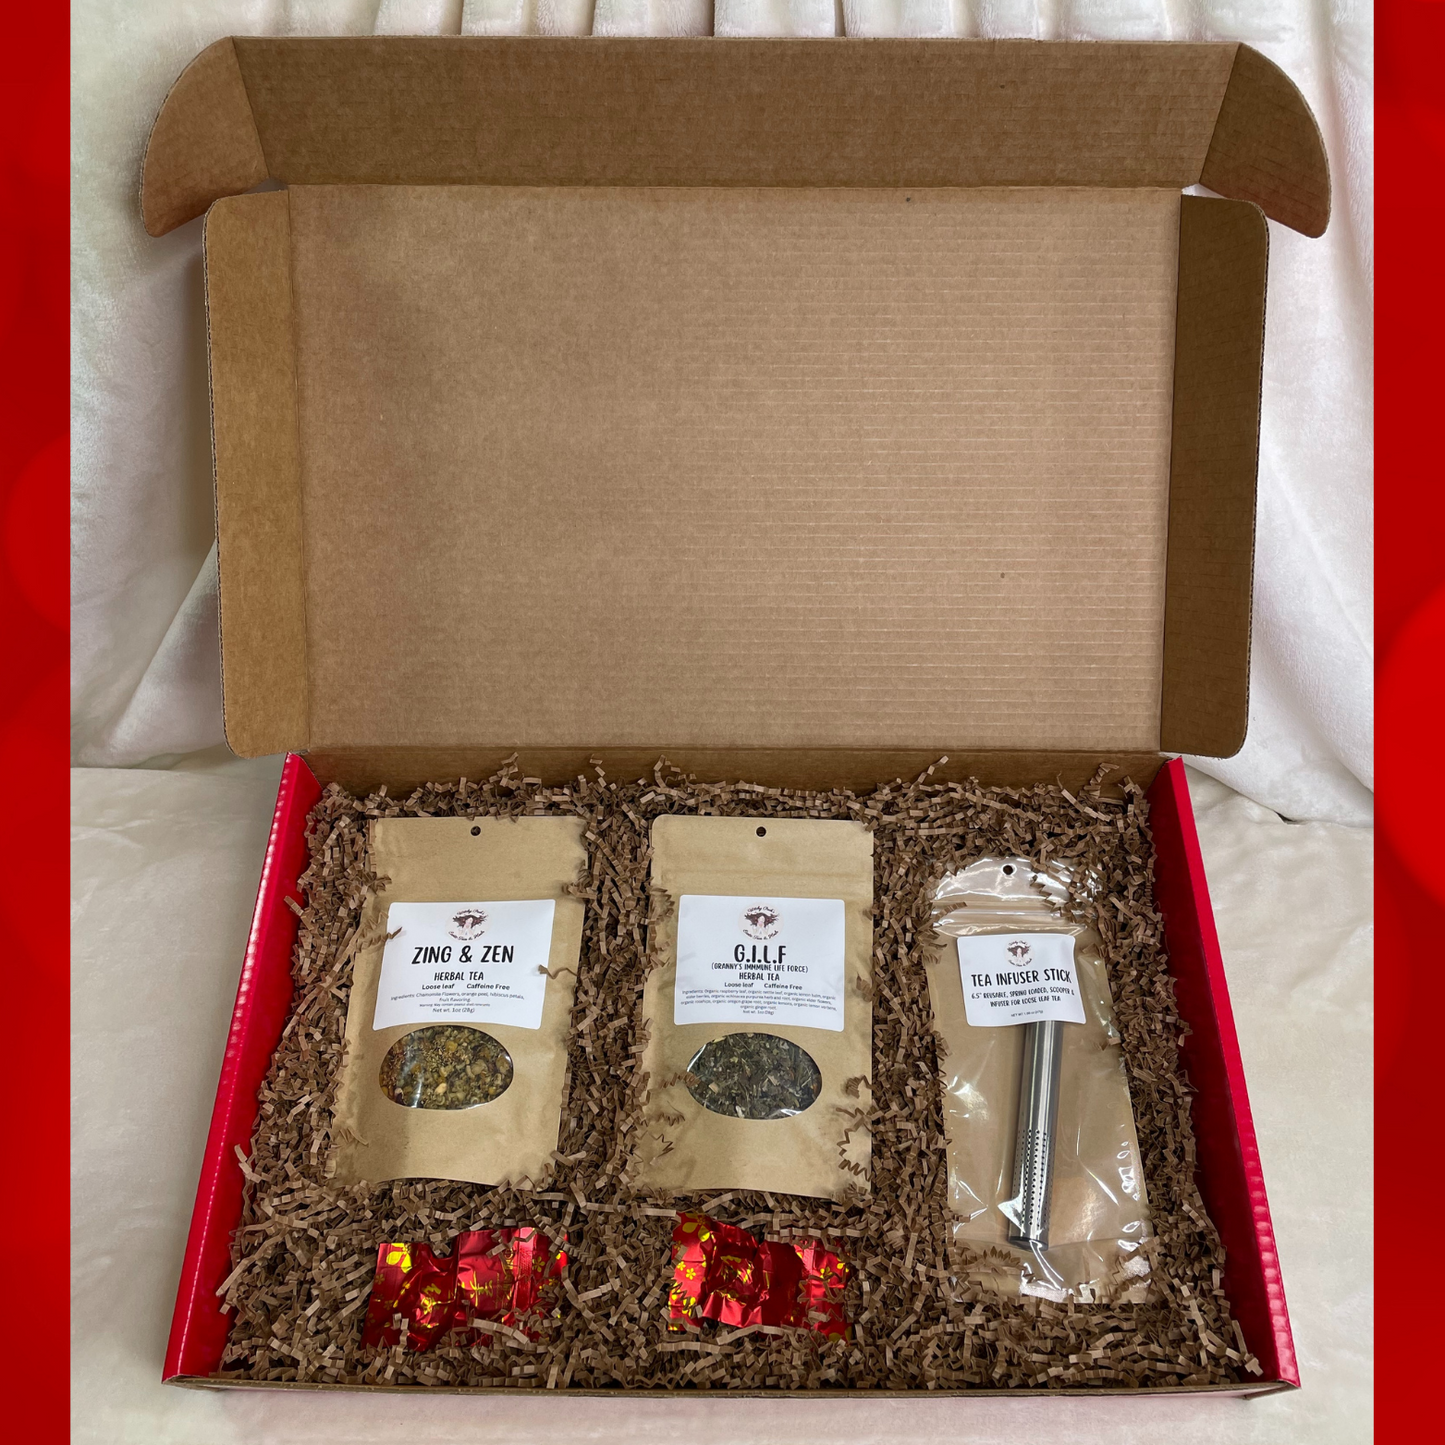 Gift Box Set with 2-1oz Pouches of Tea, A Spring Action Tea Infuser Stick, 2 Blooming Tea Balls in a Large Red Mailer Box